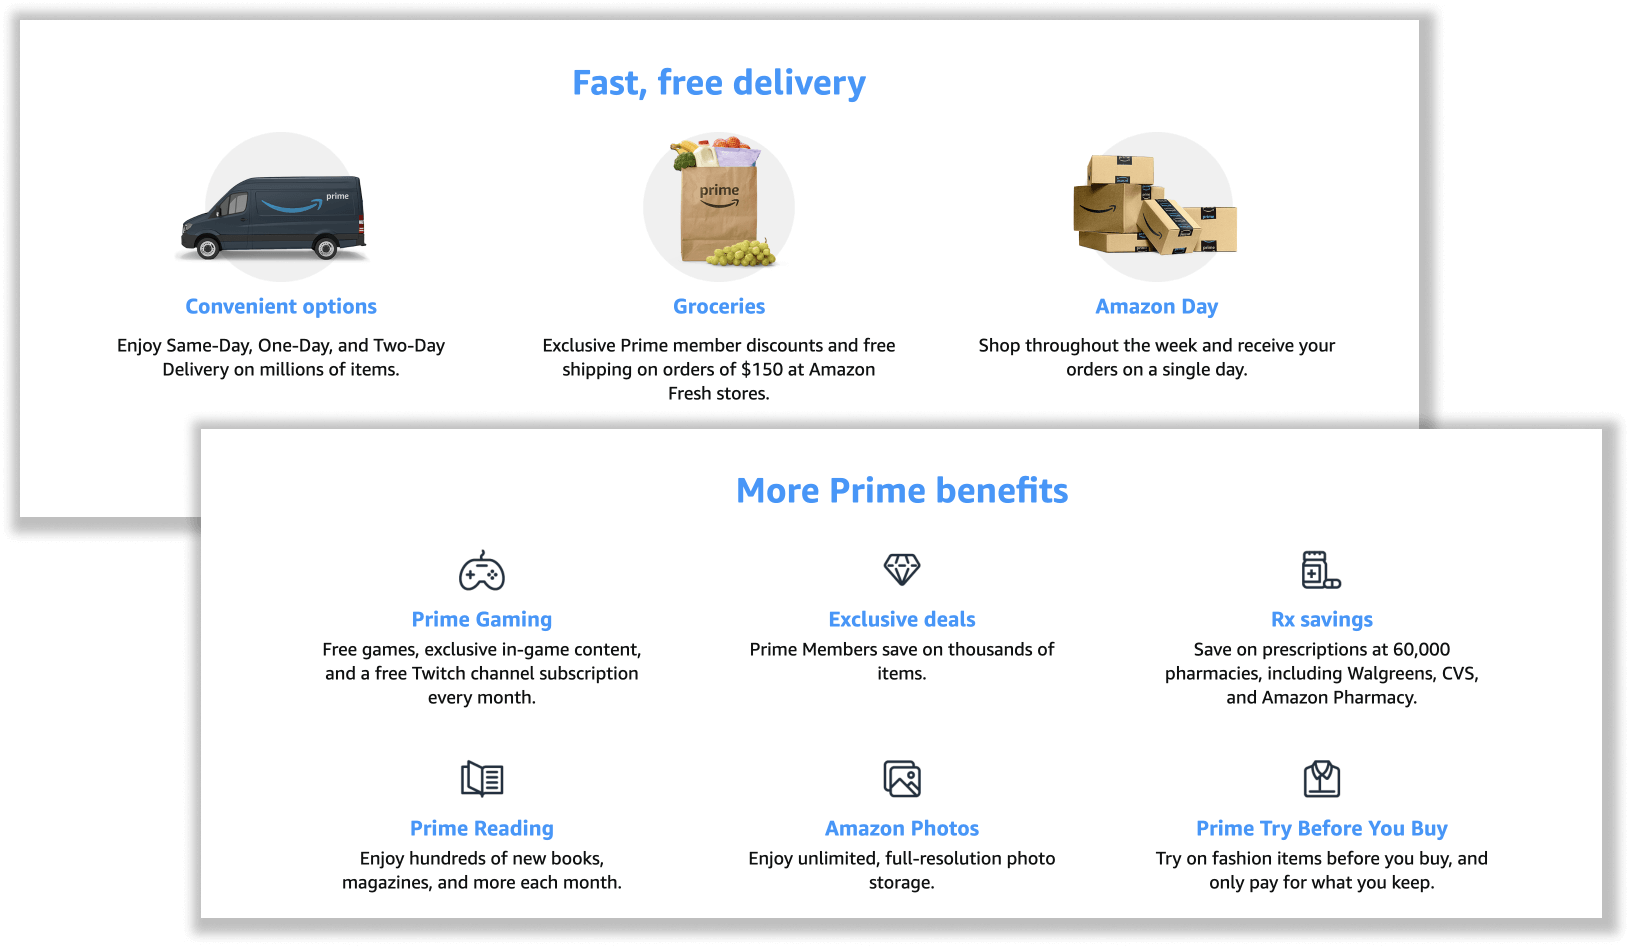 An overlay of 2 screenshots from Amazon Prime’s explainer page on its website showing the program benefits with corresponding icons. The first screenshot shows fast, free delivery benefits: convenient options (enjoy same-day delivery, one-day delivery, and two-day delivery on millions of items), groceries (exclusive Prime discounts and free shipping on orders of $150 at Amazon Fresh stores), and Amazon day (shop throughout the week and receive your orders on a single day). The second screenshot shows more Prime benefits: Prime Gaming (free games, exclusive in-game content, and a free Twitch channel subscription every month), exclusive deals (Prime members save on thousands of items), Rx Savings (save on prescriptions at 60,000 pharmacies, including Walgreens, CVS, and Amazon Pharmacy), Prime Readings (enjoy hundreds of new books, magazines, and more each month), Amazon Photos (enjoy unlimited, full-resolution photo storage), and Prime Try Before You Buy (try on fashion items before you buy, and only pay for what you keep). 